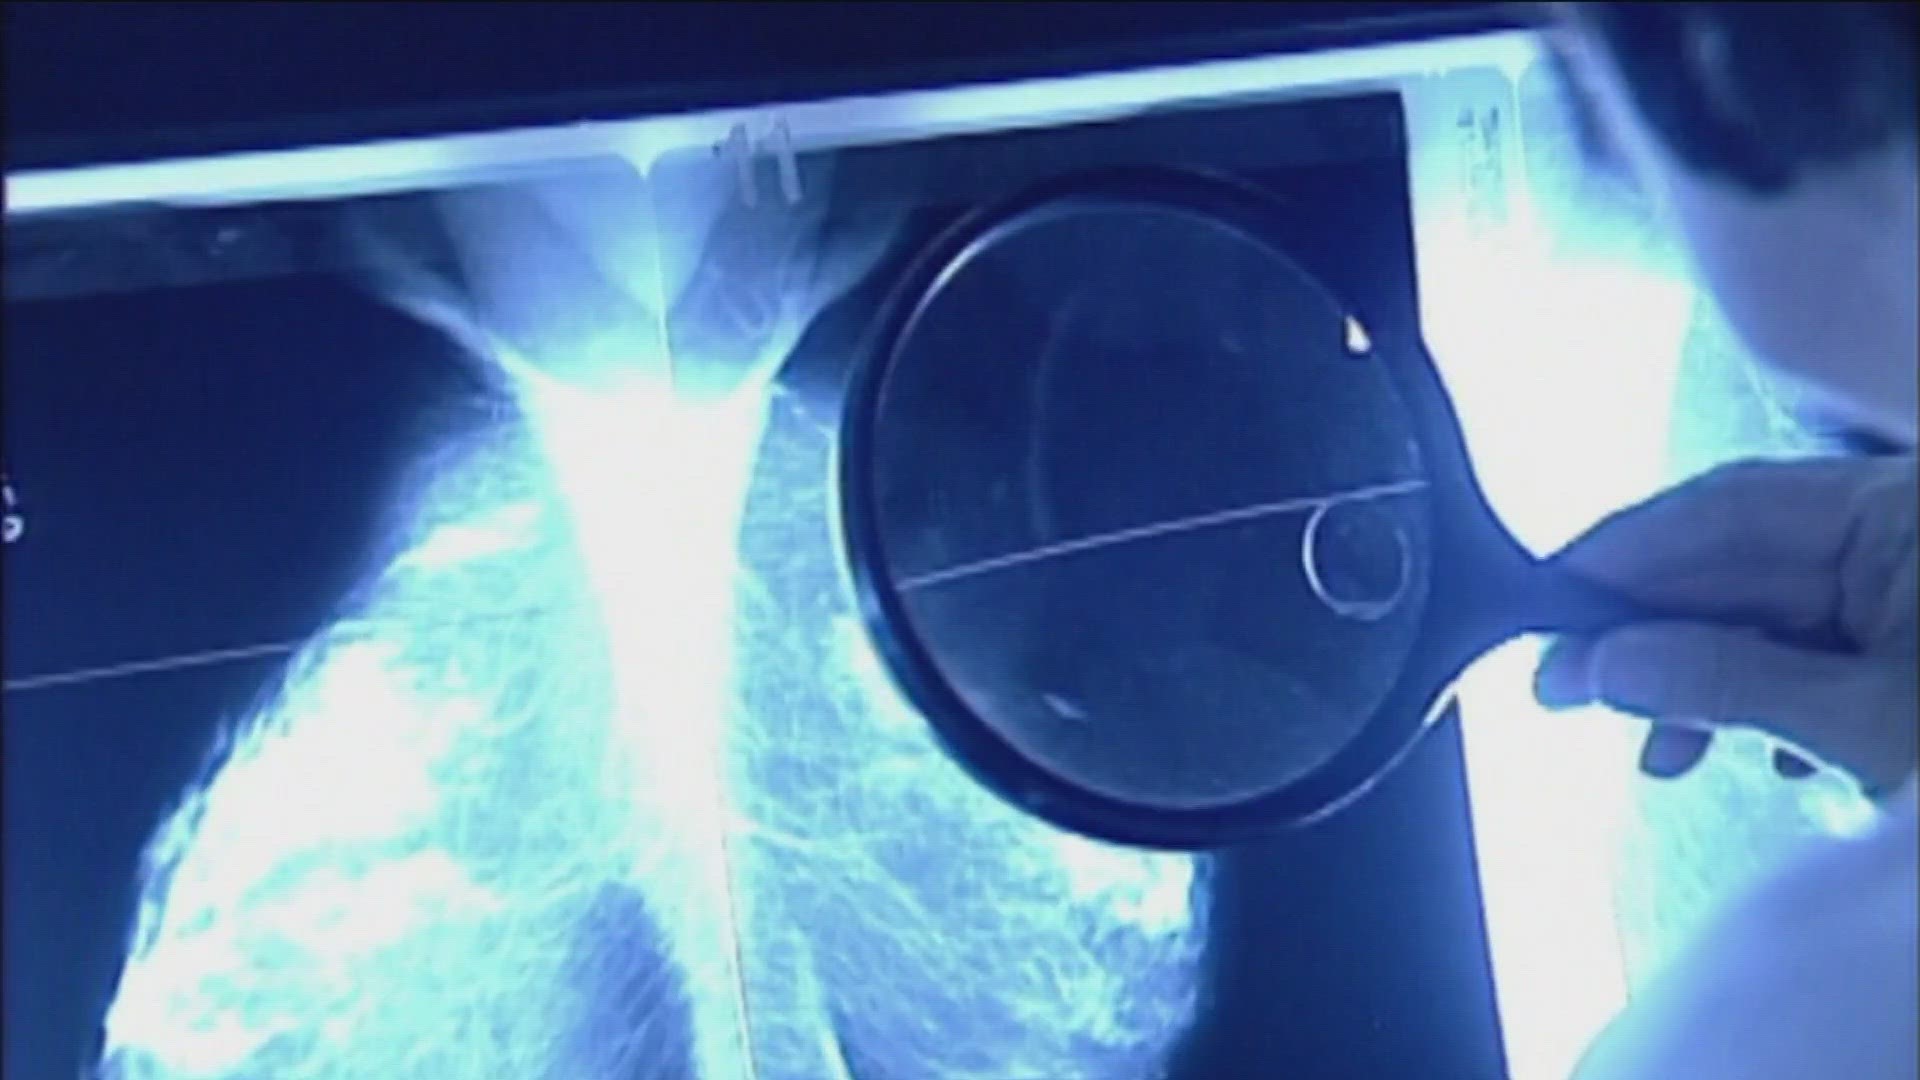 The U.S. Preventive Services Task Force has updated the recommended age for mammograms from fifty to forty.